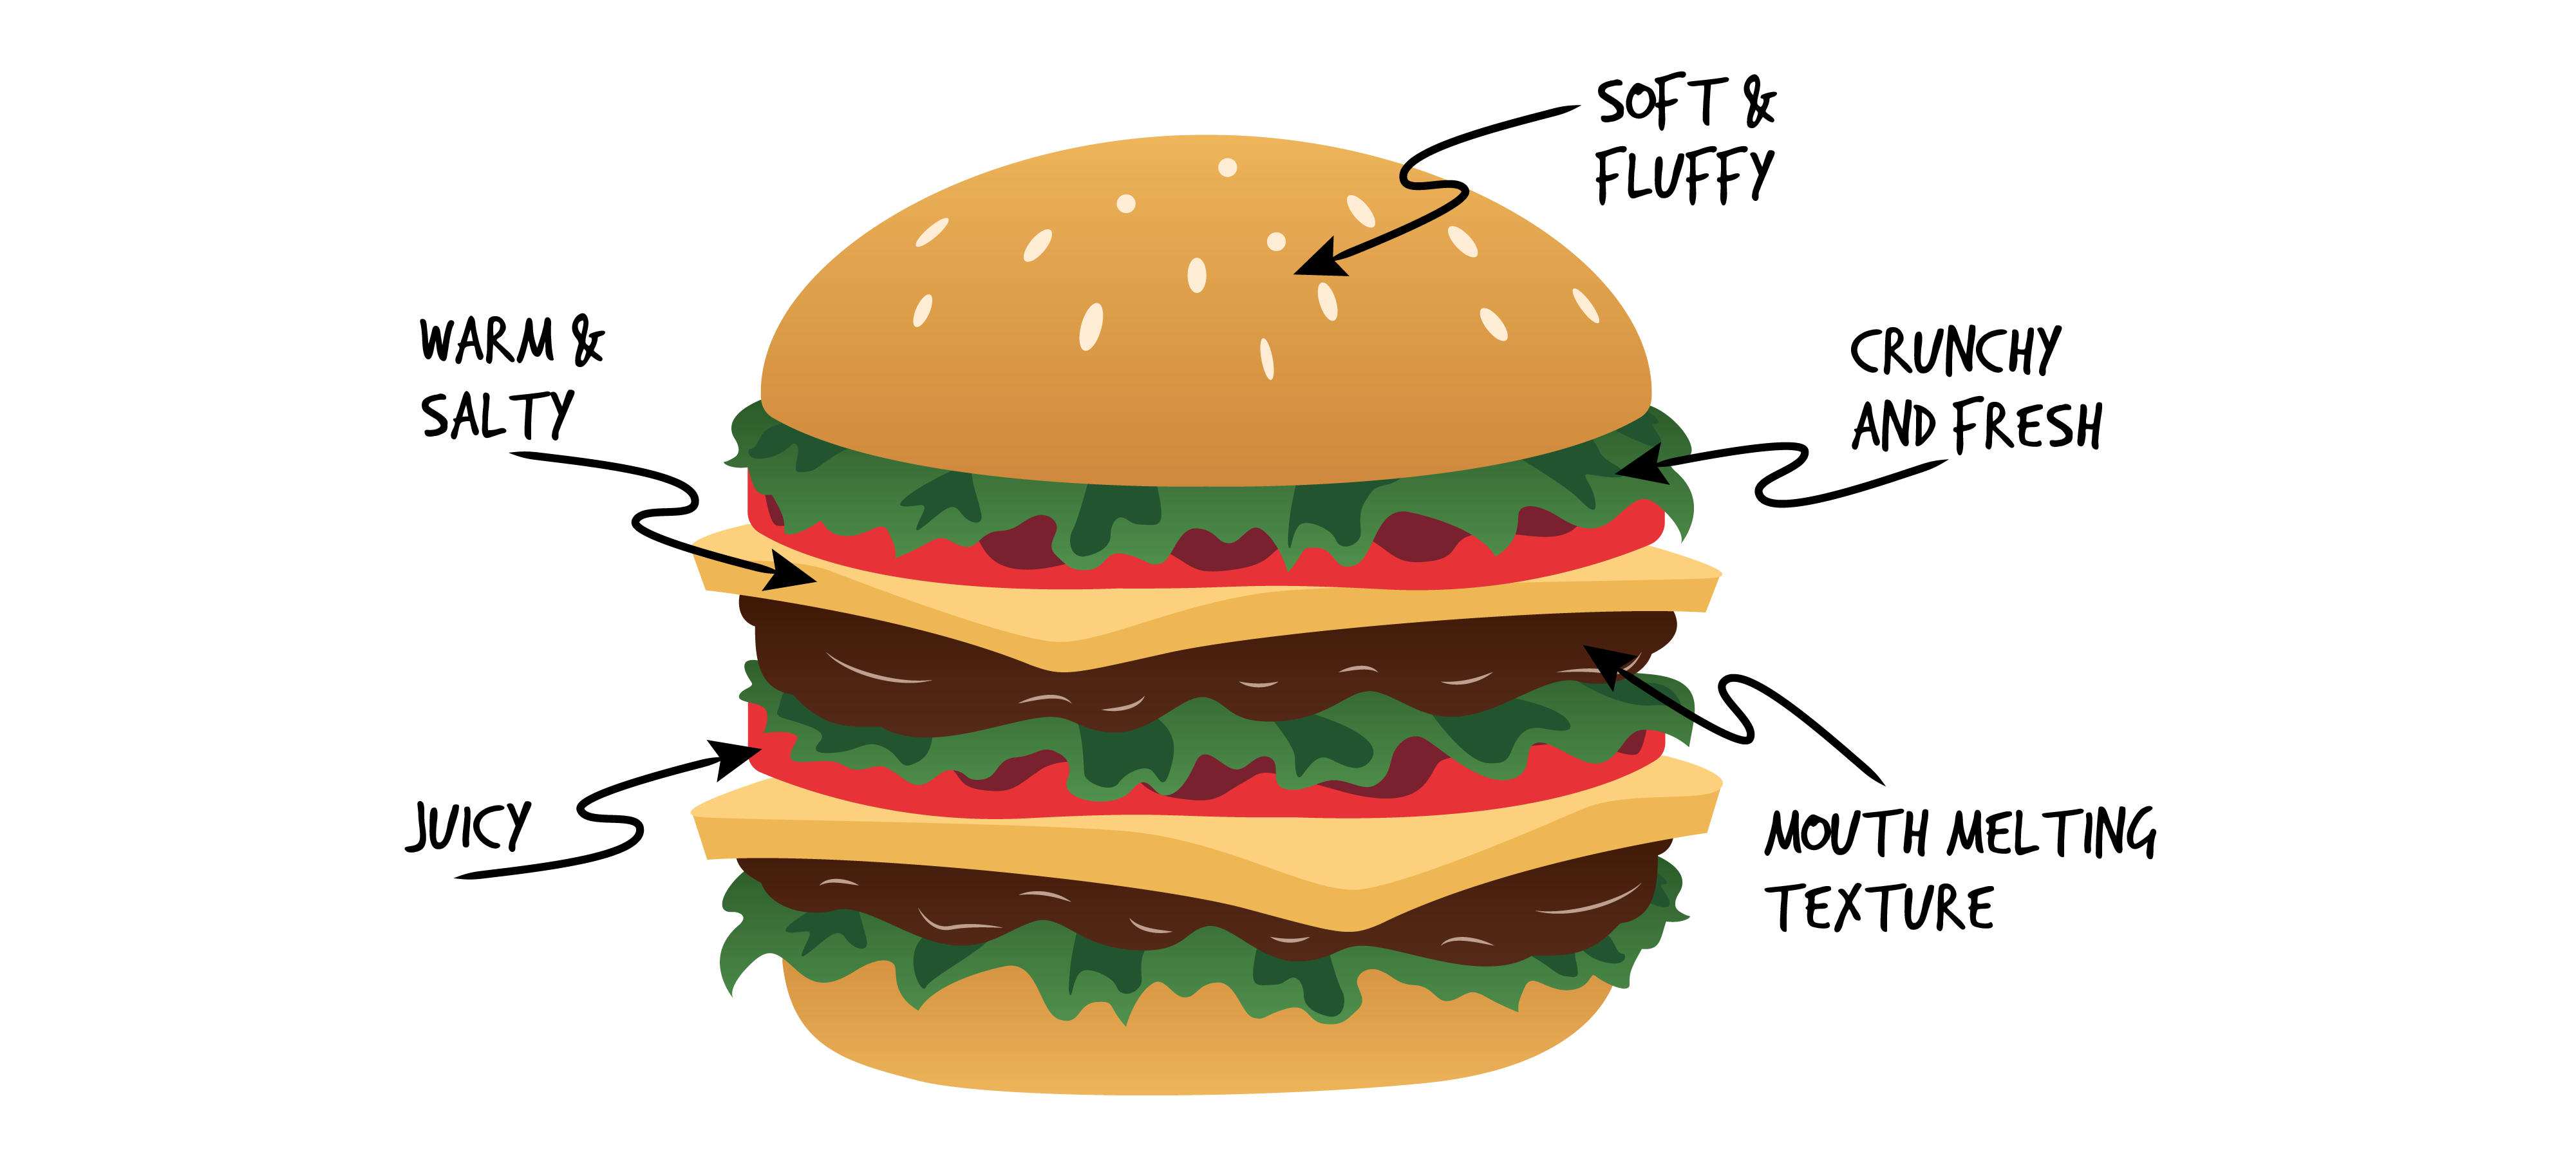 Burger with sesame bun and two layers of lettuce, patty, cheese and tomato. Text Soft & fluffy with arrow pointing to top bun. Text Warm & salty with arrow pointing to cheese. Text Juicy with arrow pointing to tomato. Text Crunchy & fresh with arrow pointing to lettuce. Text Mouth melting texture with arrow pointing to patty.